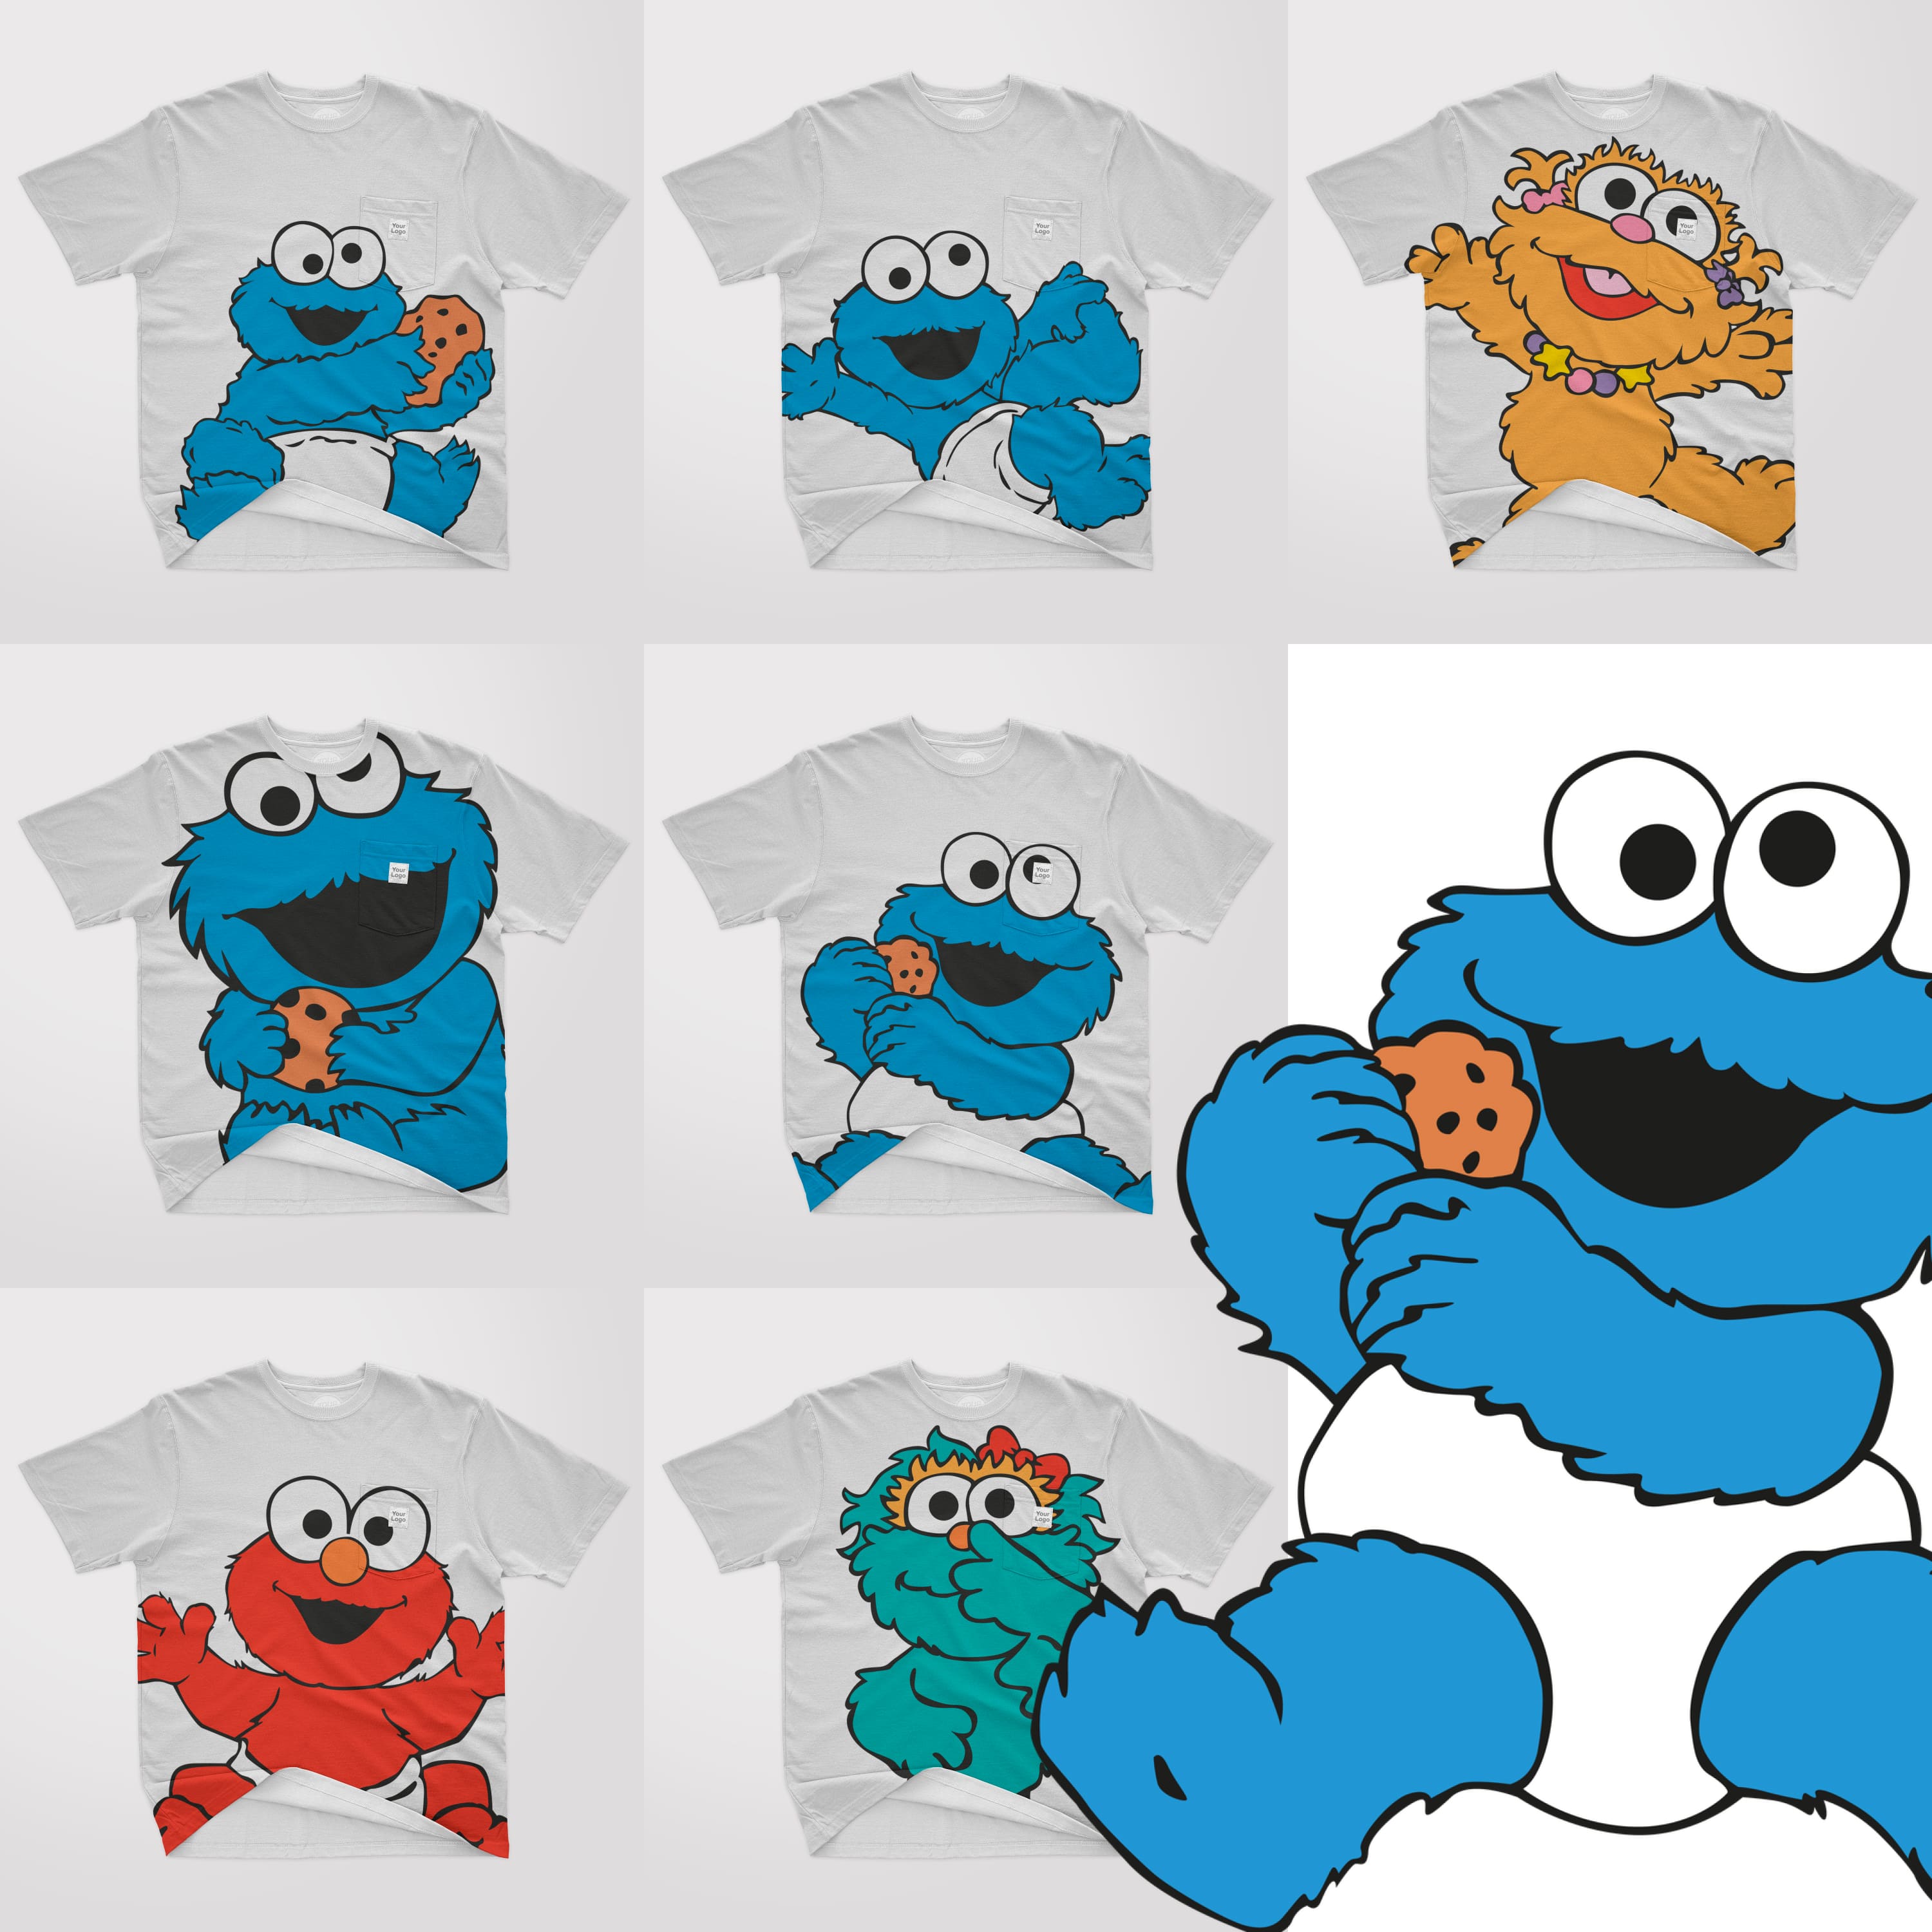 Baby Cookie Monster T-shirt Designs Bundle Cover.